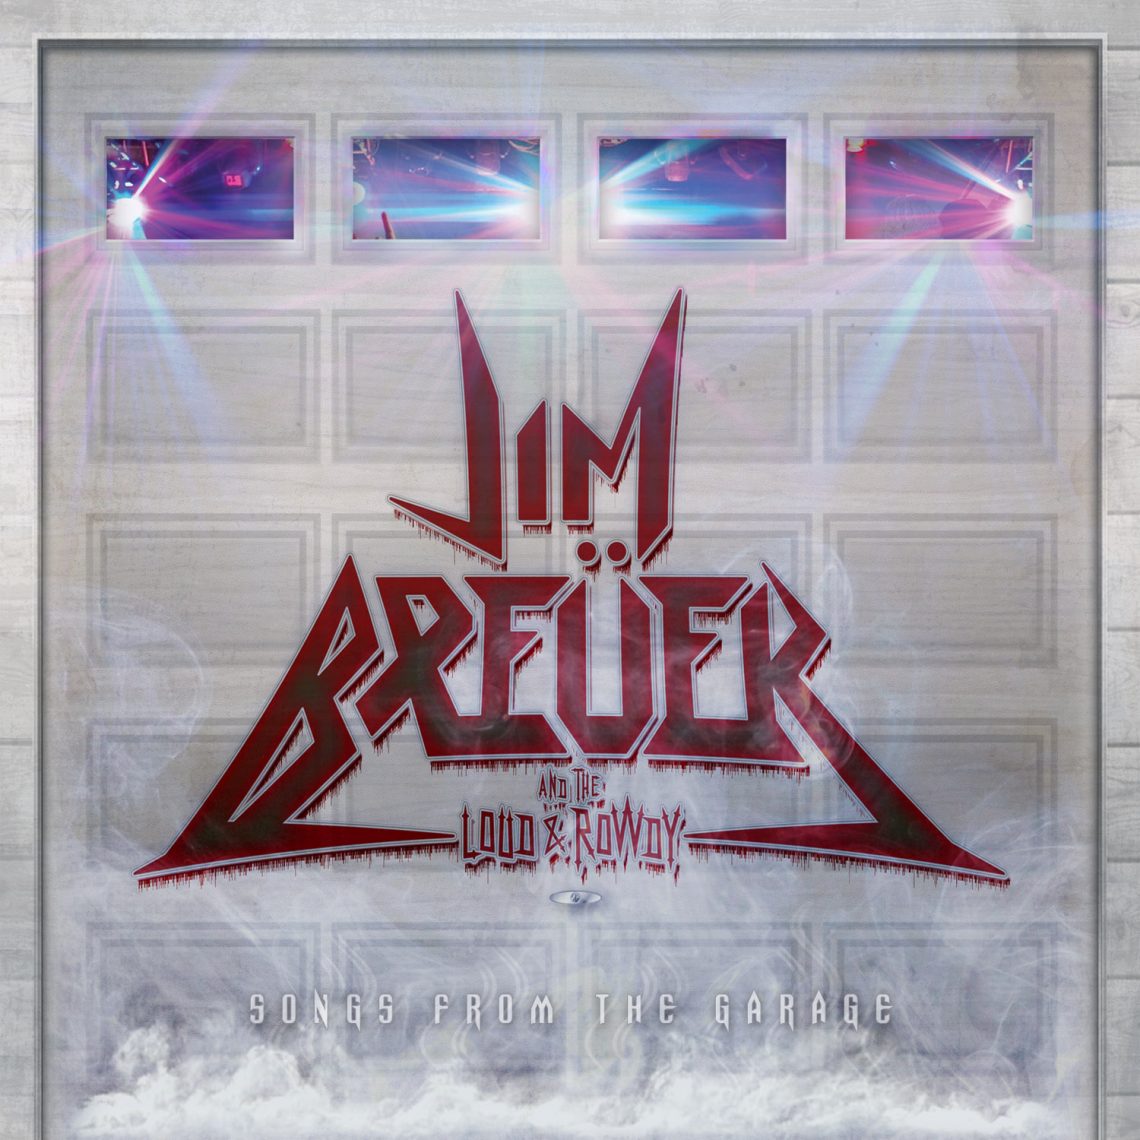 Jim Breuer and the Loud & Rowdy – Songs from the Garage – CD Review